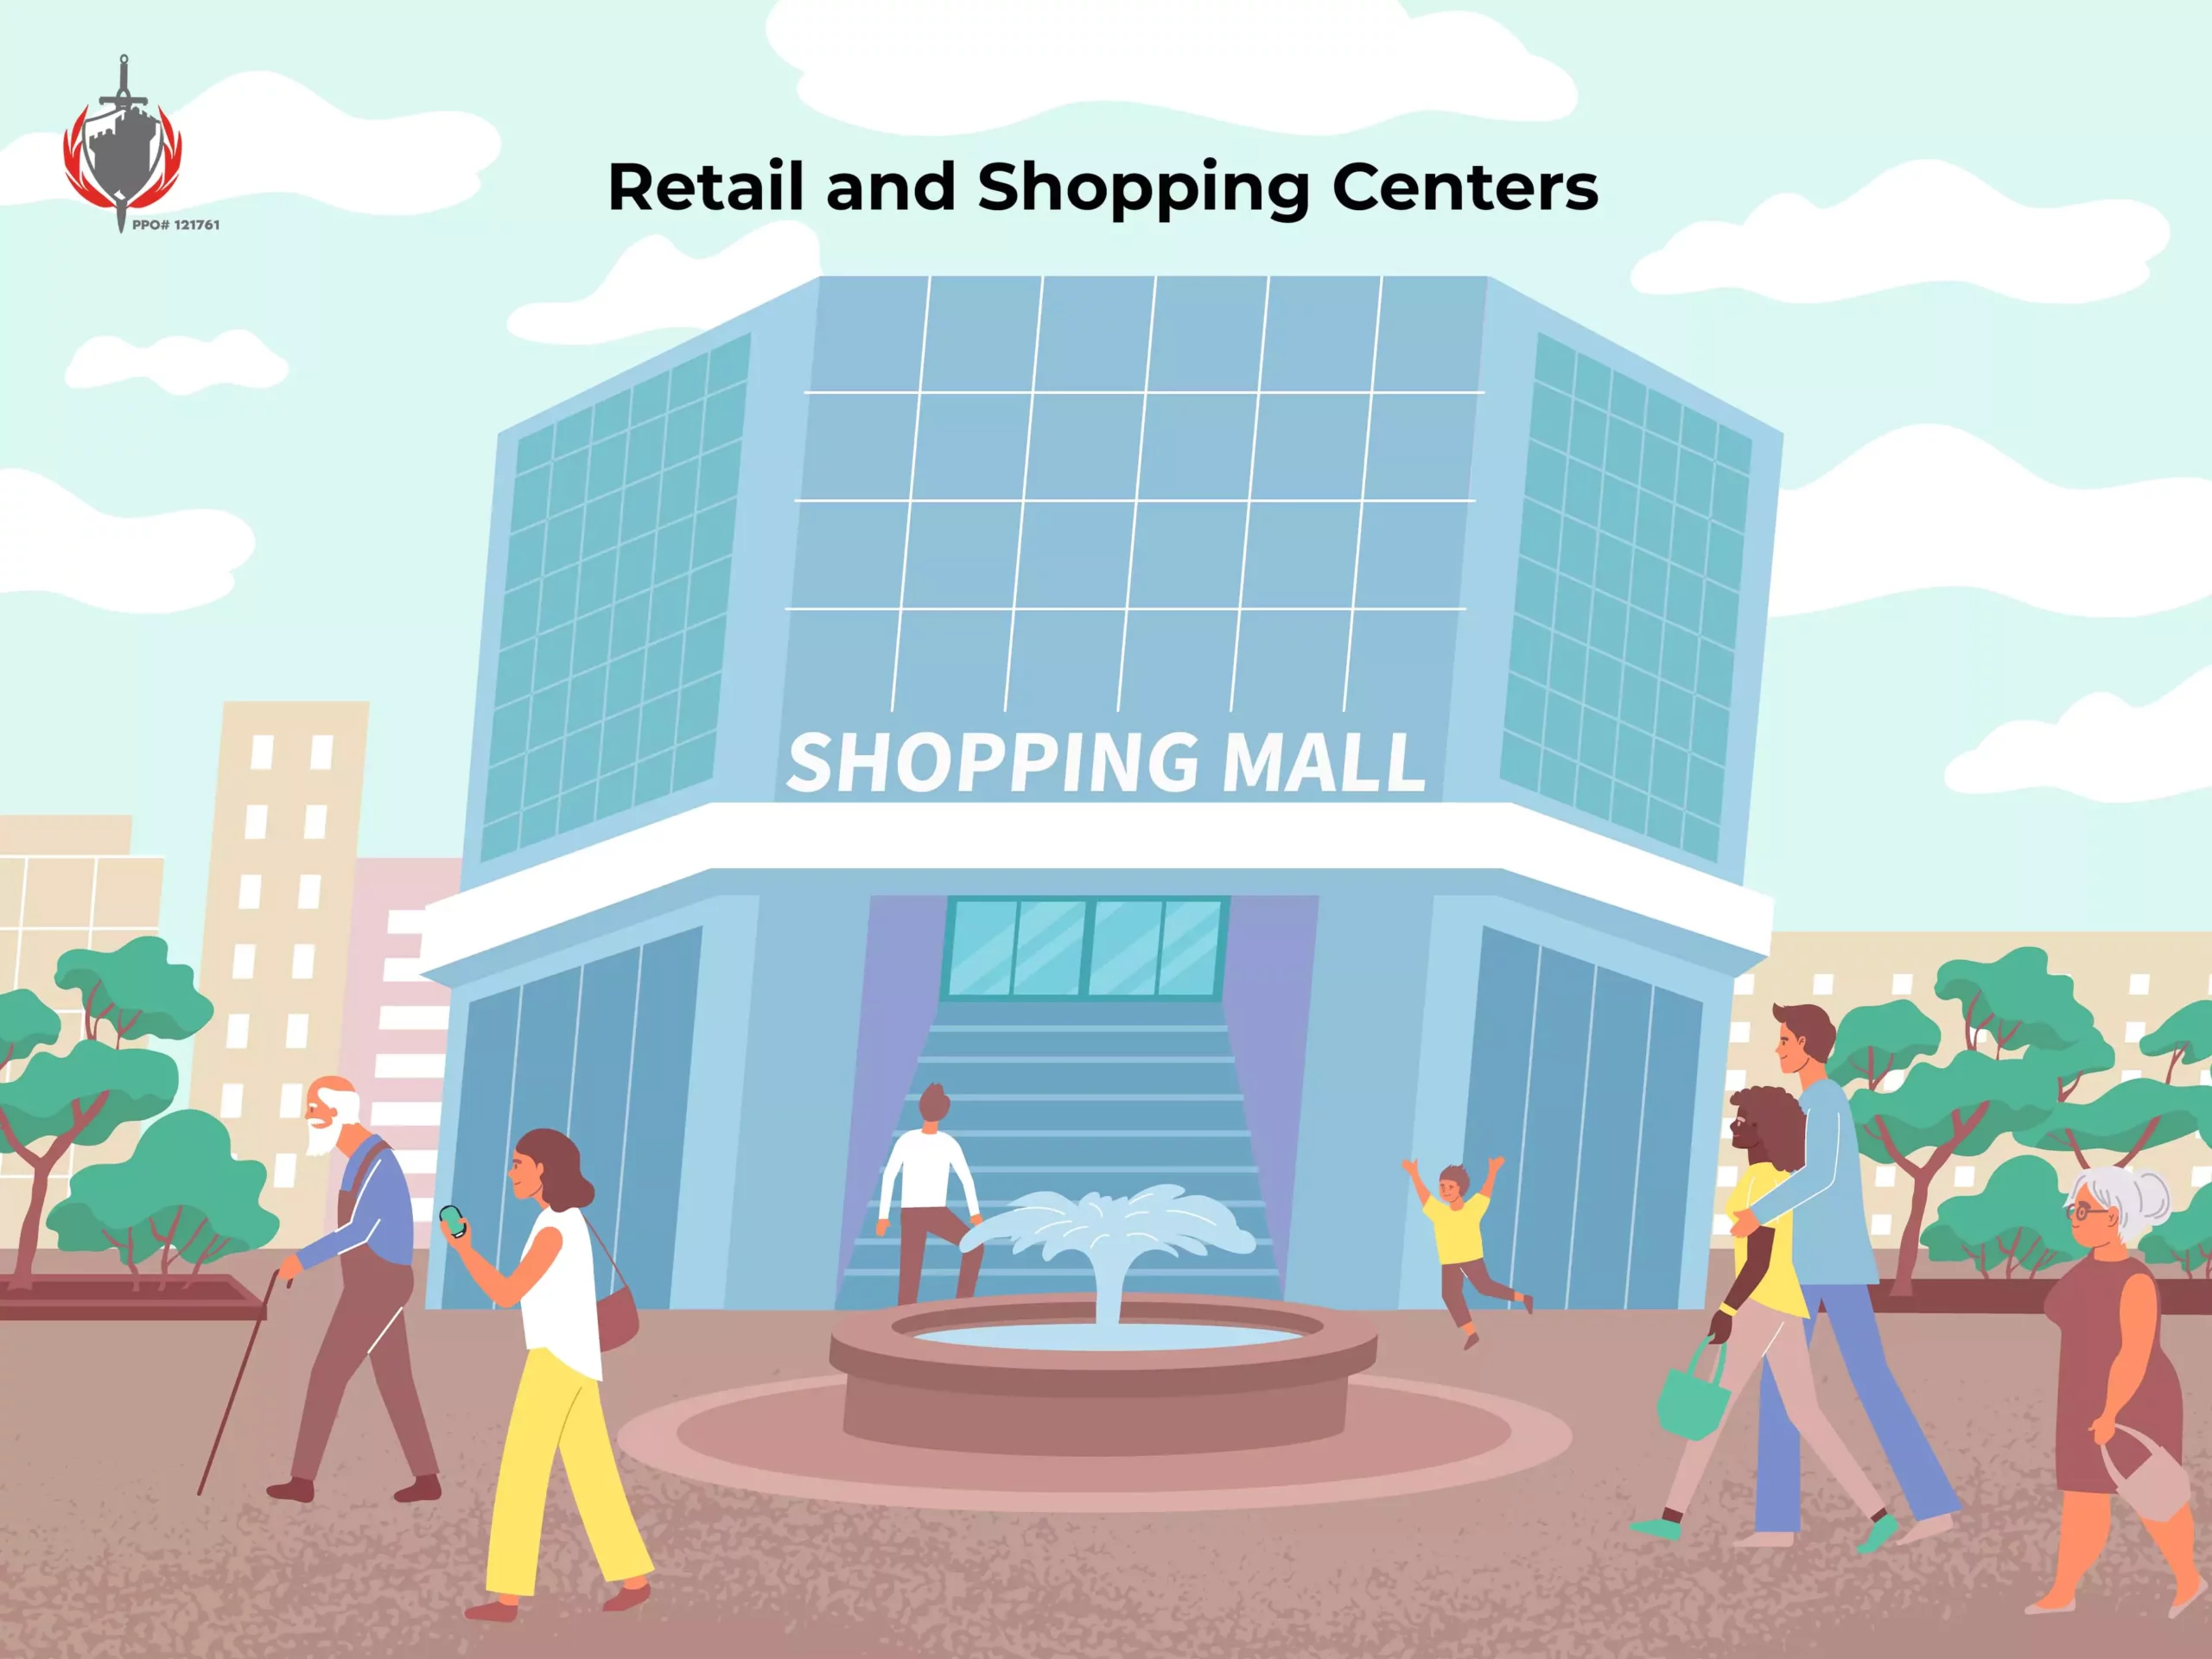 Retail and Shopping Centers